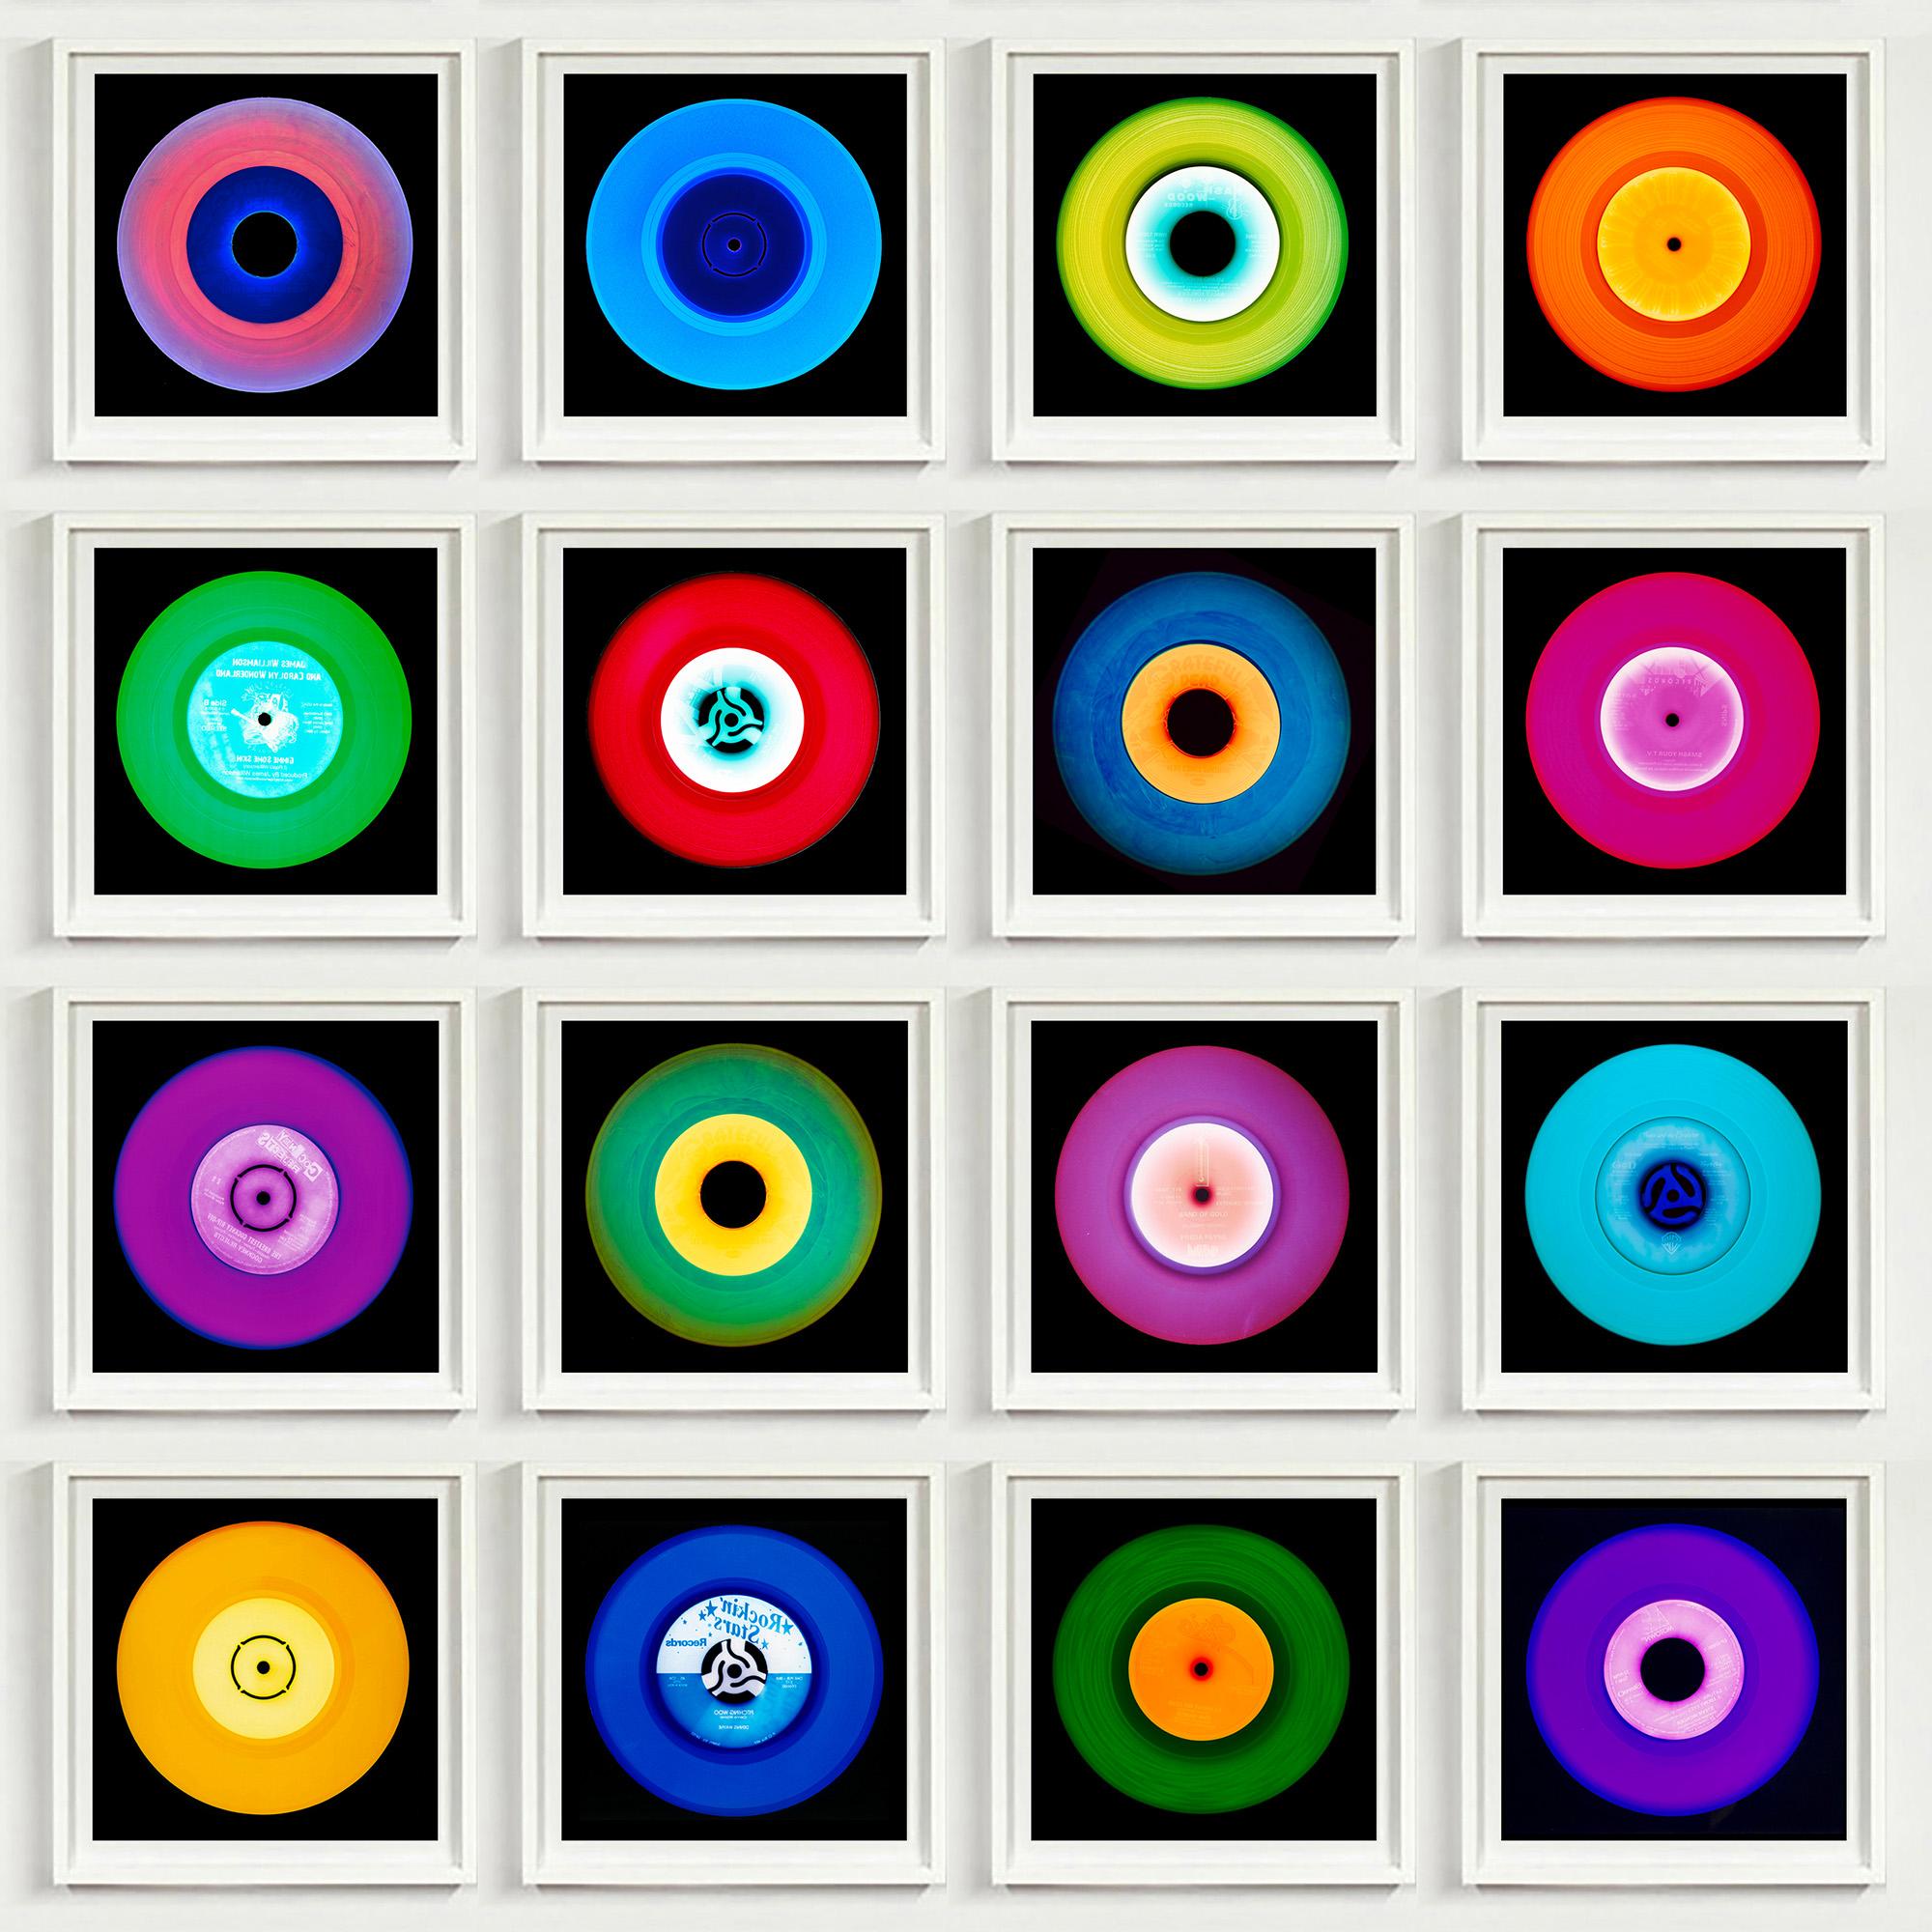 Vinyl Collection 16 Piece Multicolor Square Installation - Pop Art Photography - Beige Color Photograph by Heidler & Heeps